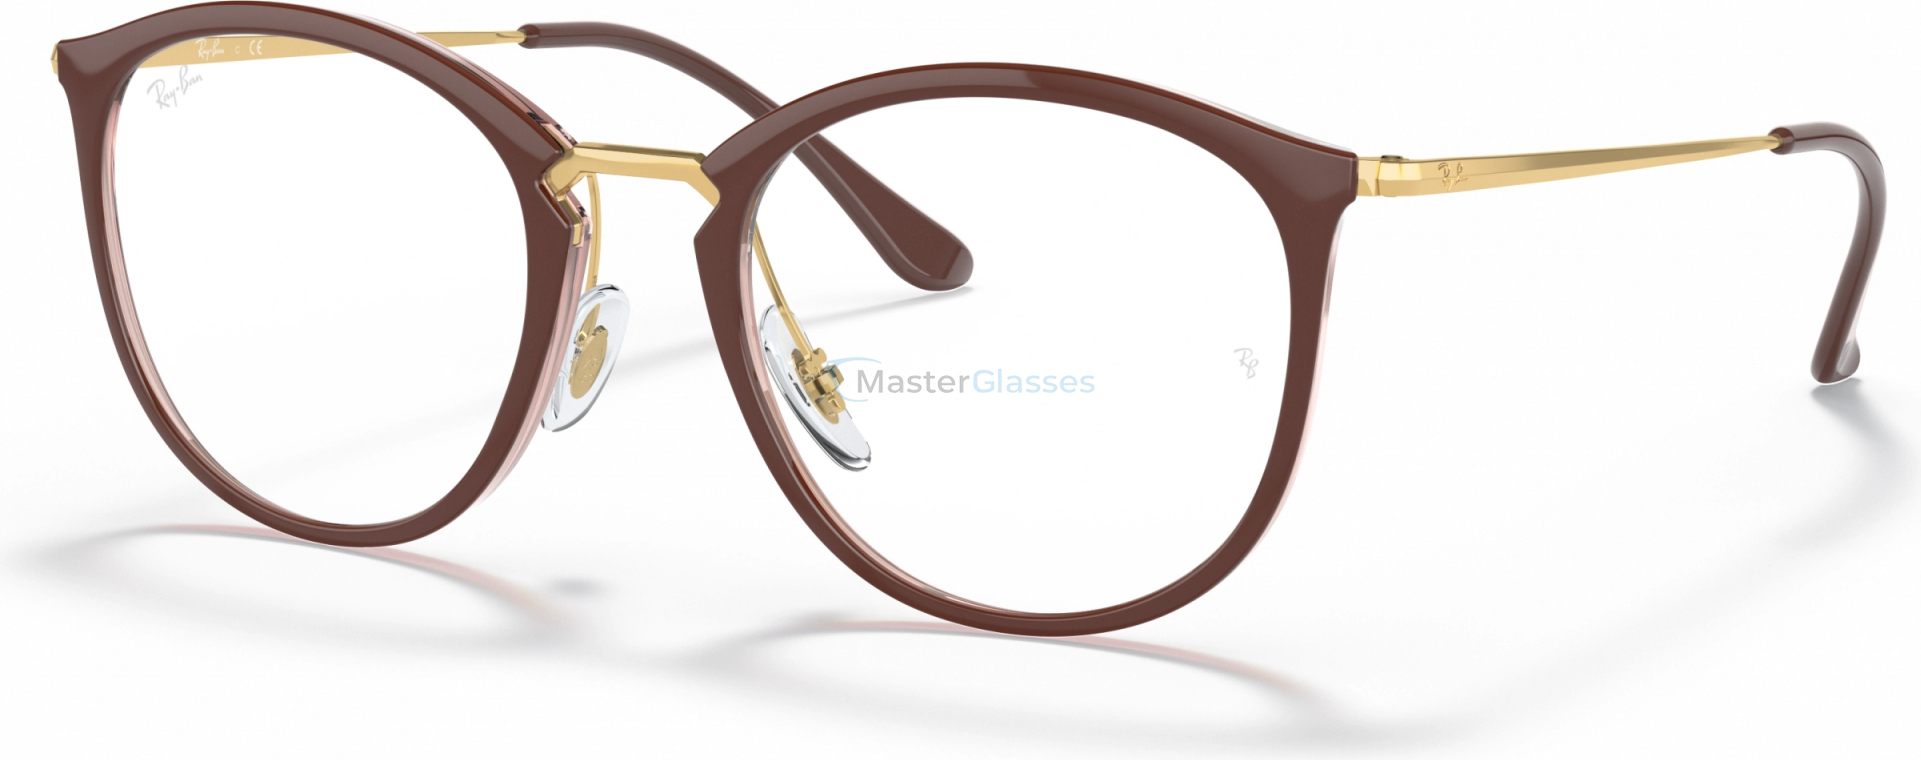  Ray-Ban RX7140 5971 Top Brown On Trasp Brown